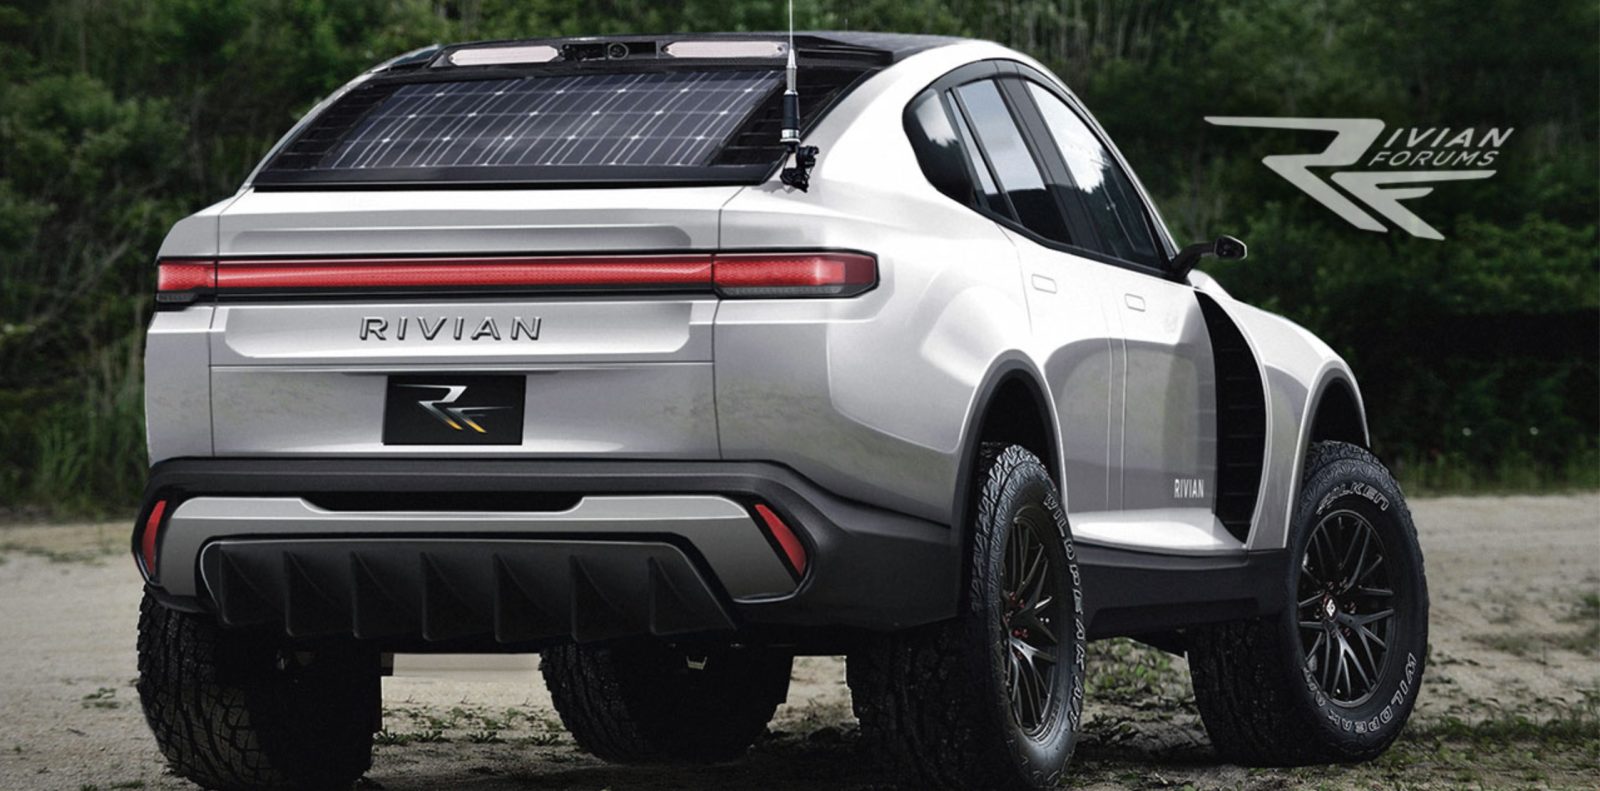 Rivian s Next Electric Vehicle After Pickup Could Be An Impressive 